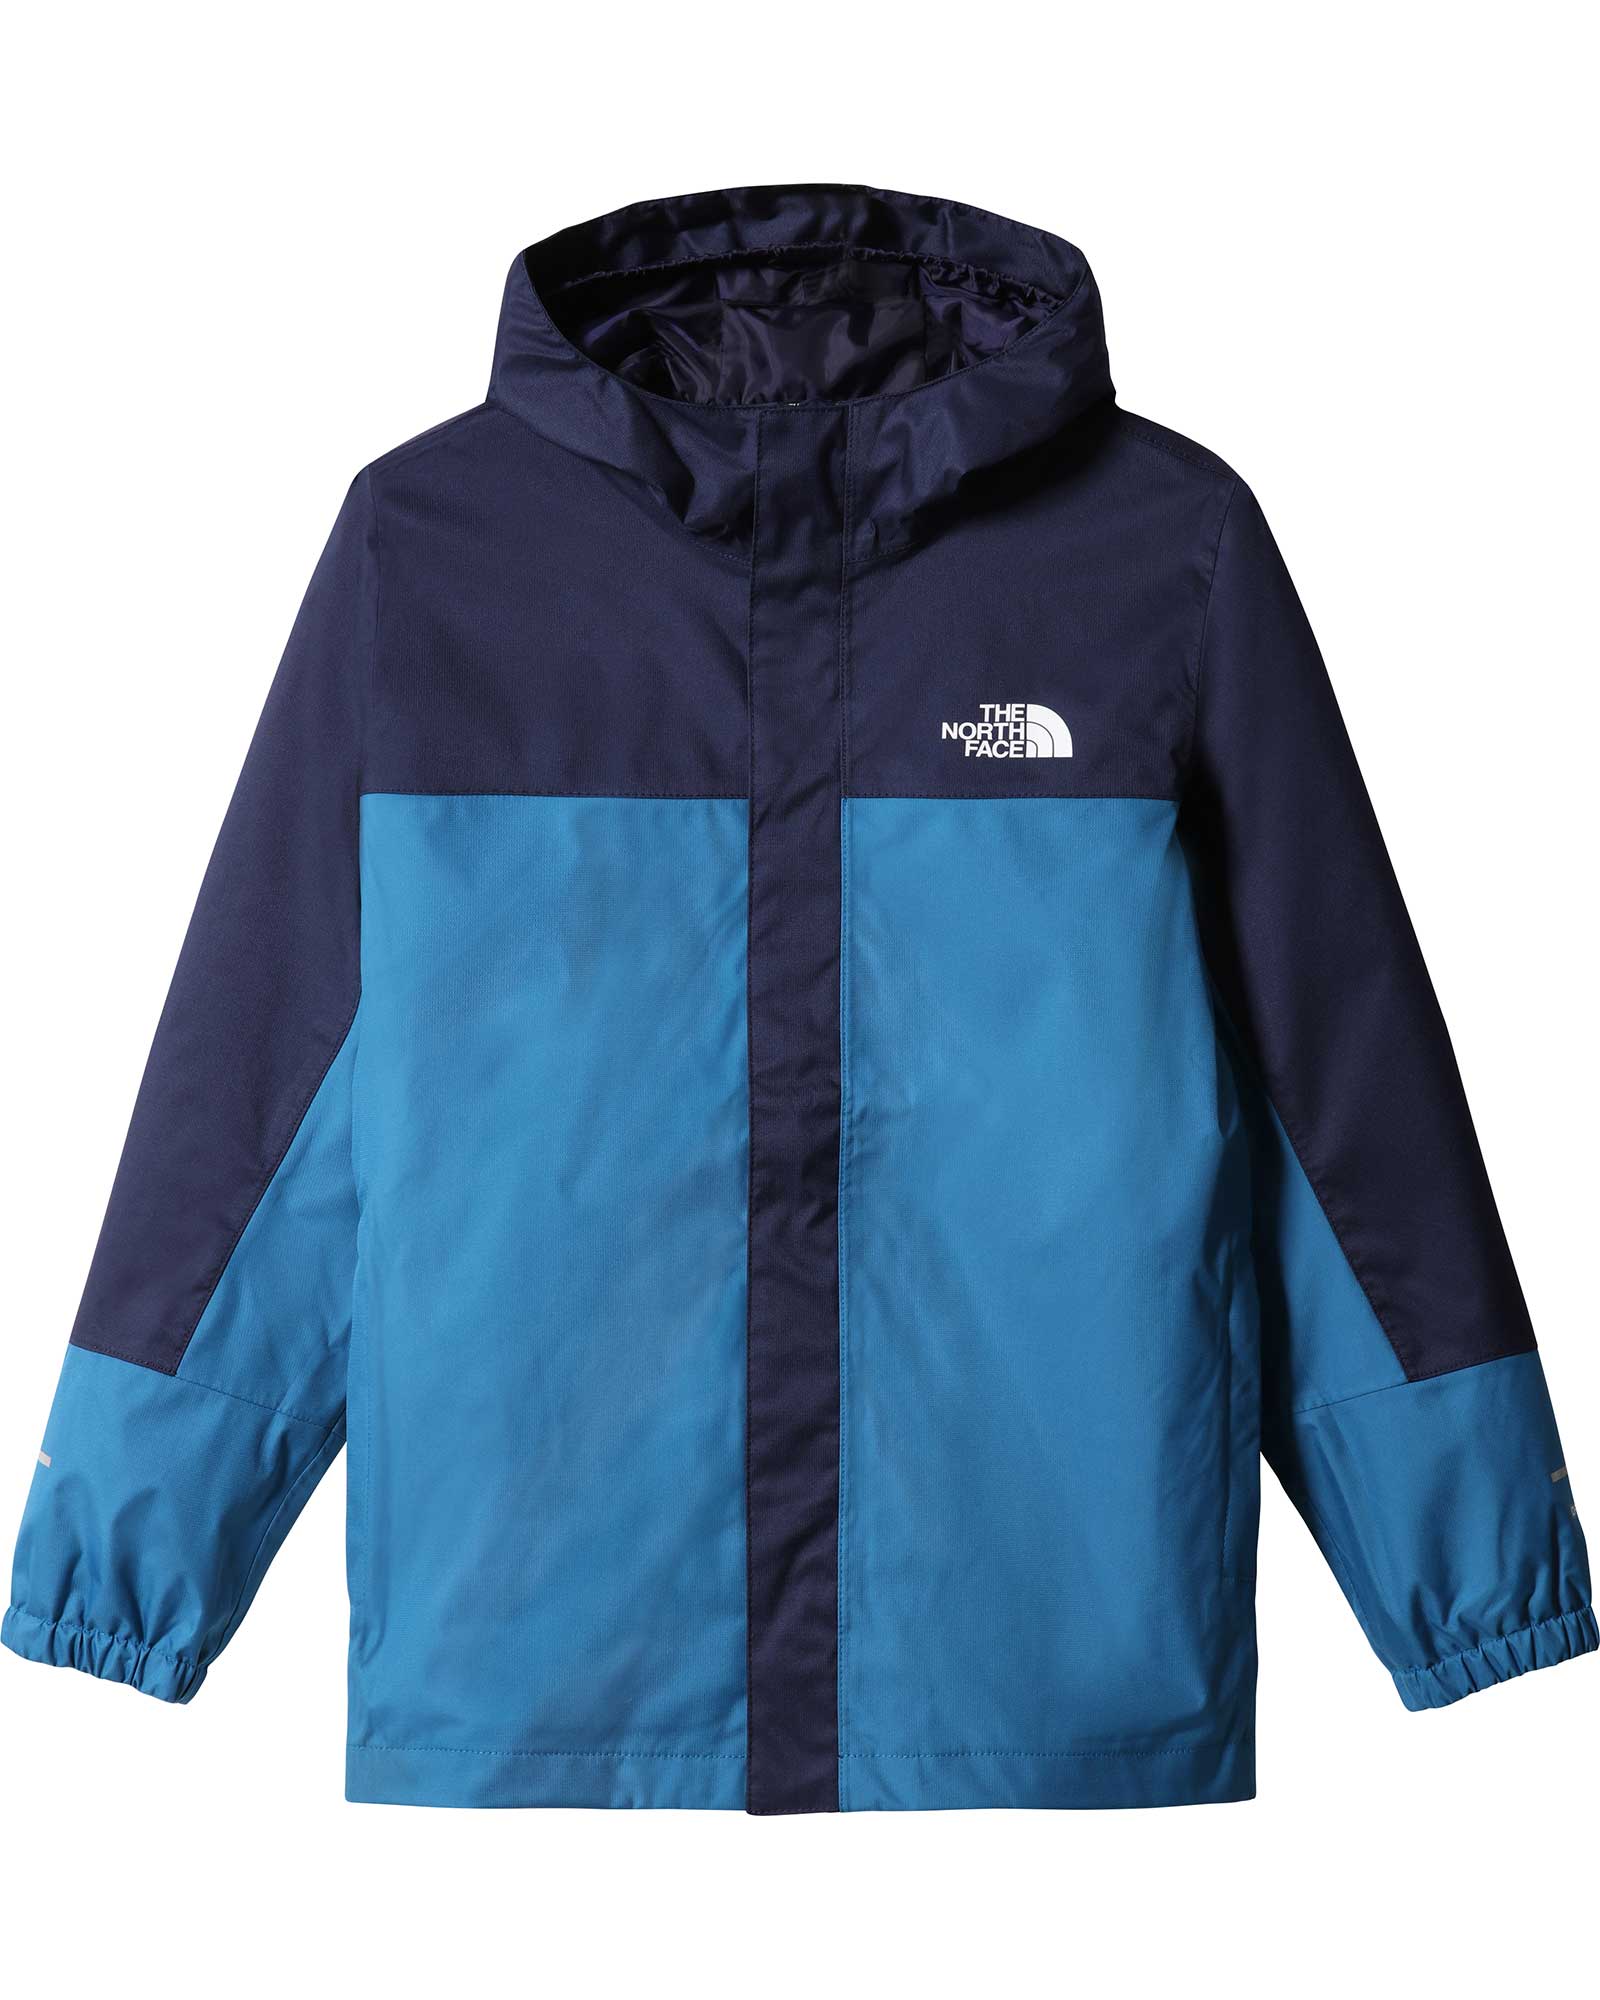 Product image of The North Face Antora Boys' Rain Jacket